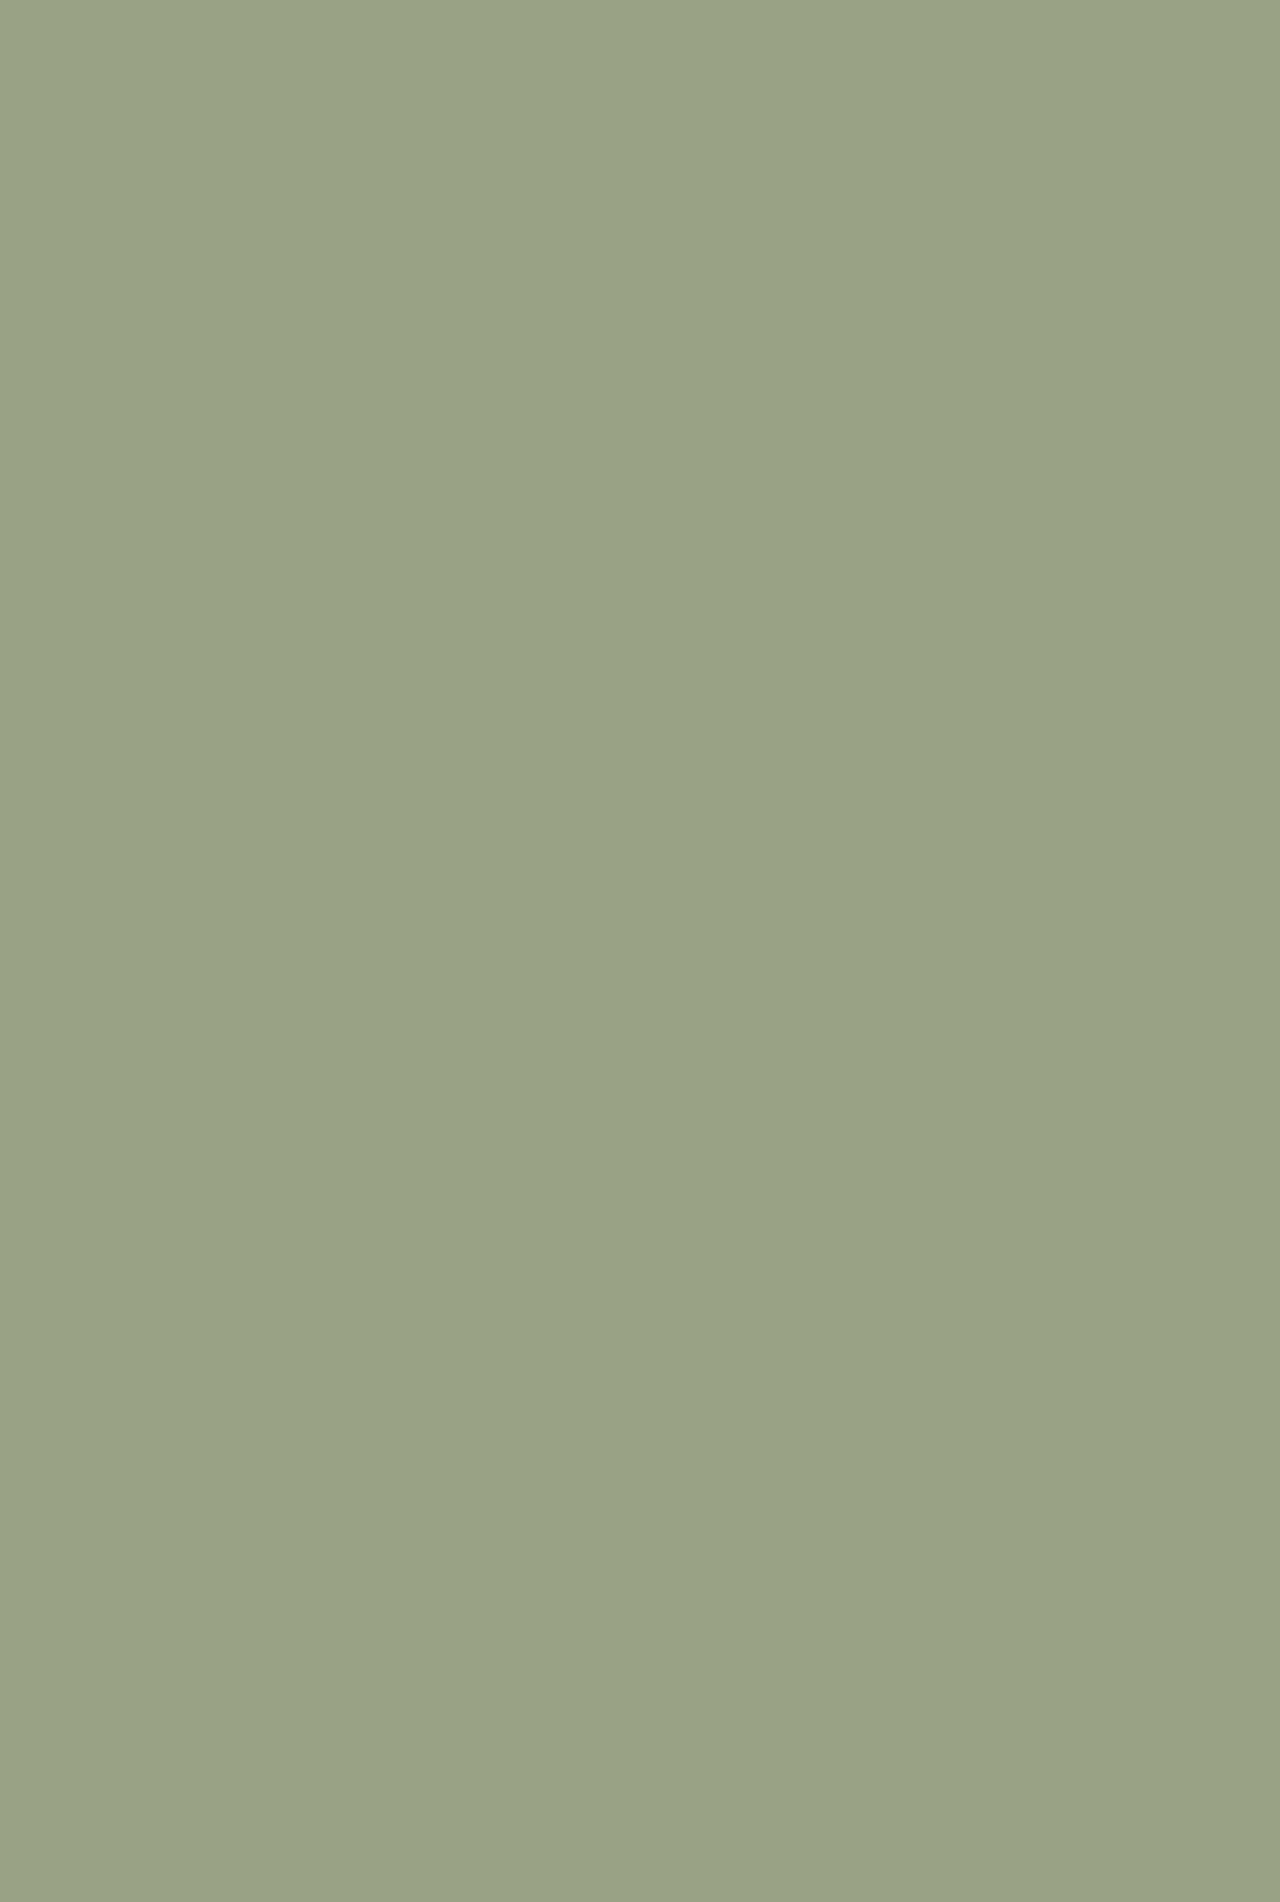 The 10 Best Paint Colors for Your Front Porch. Color wallpaper iphone, Olive green wallpaper, Sage green wallpaper